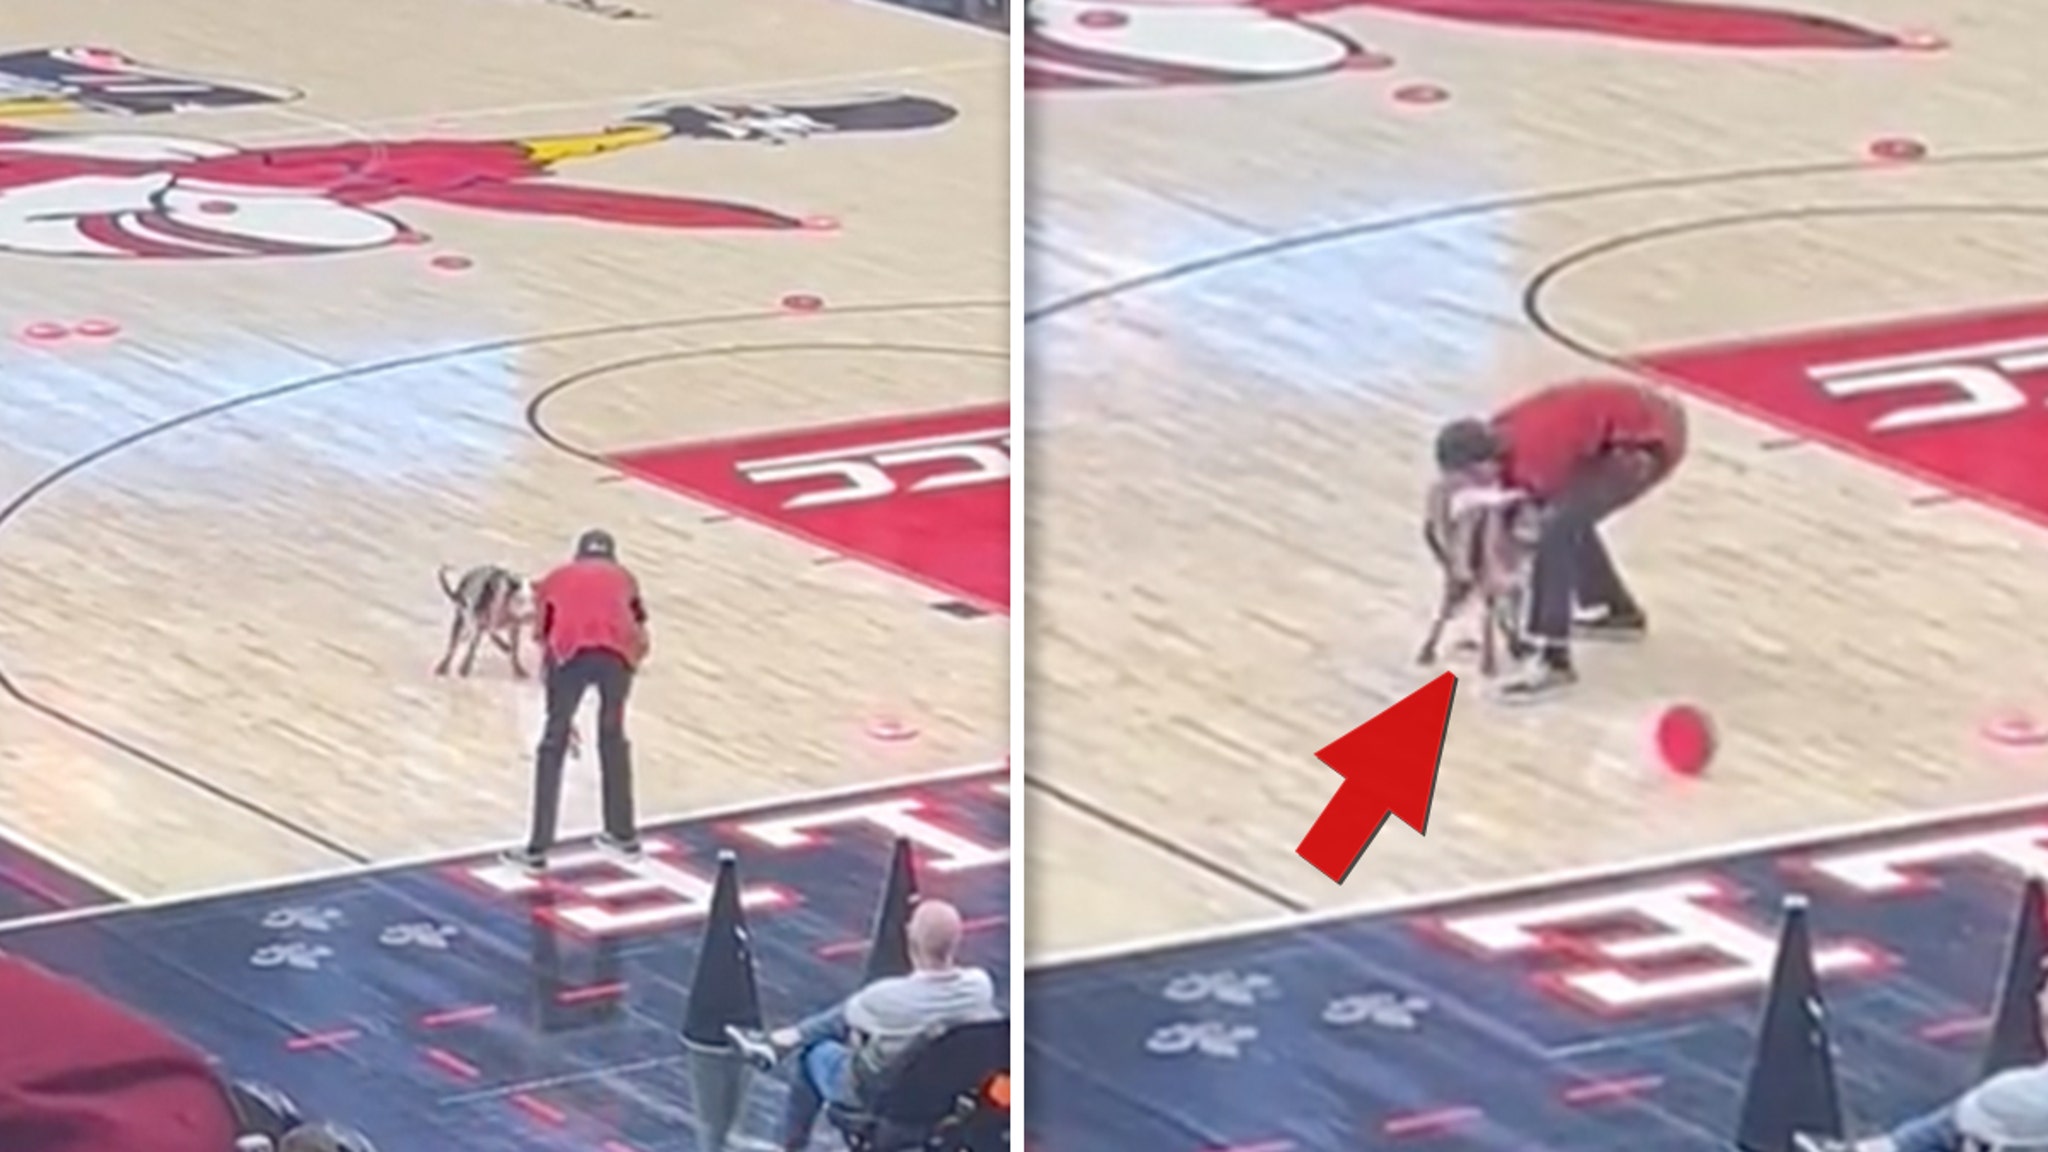 WATCH: Dog poops on court at Louisville basketball halftime show